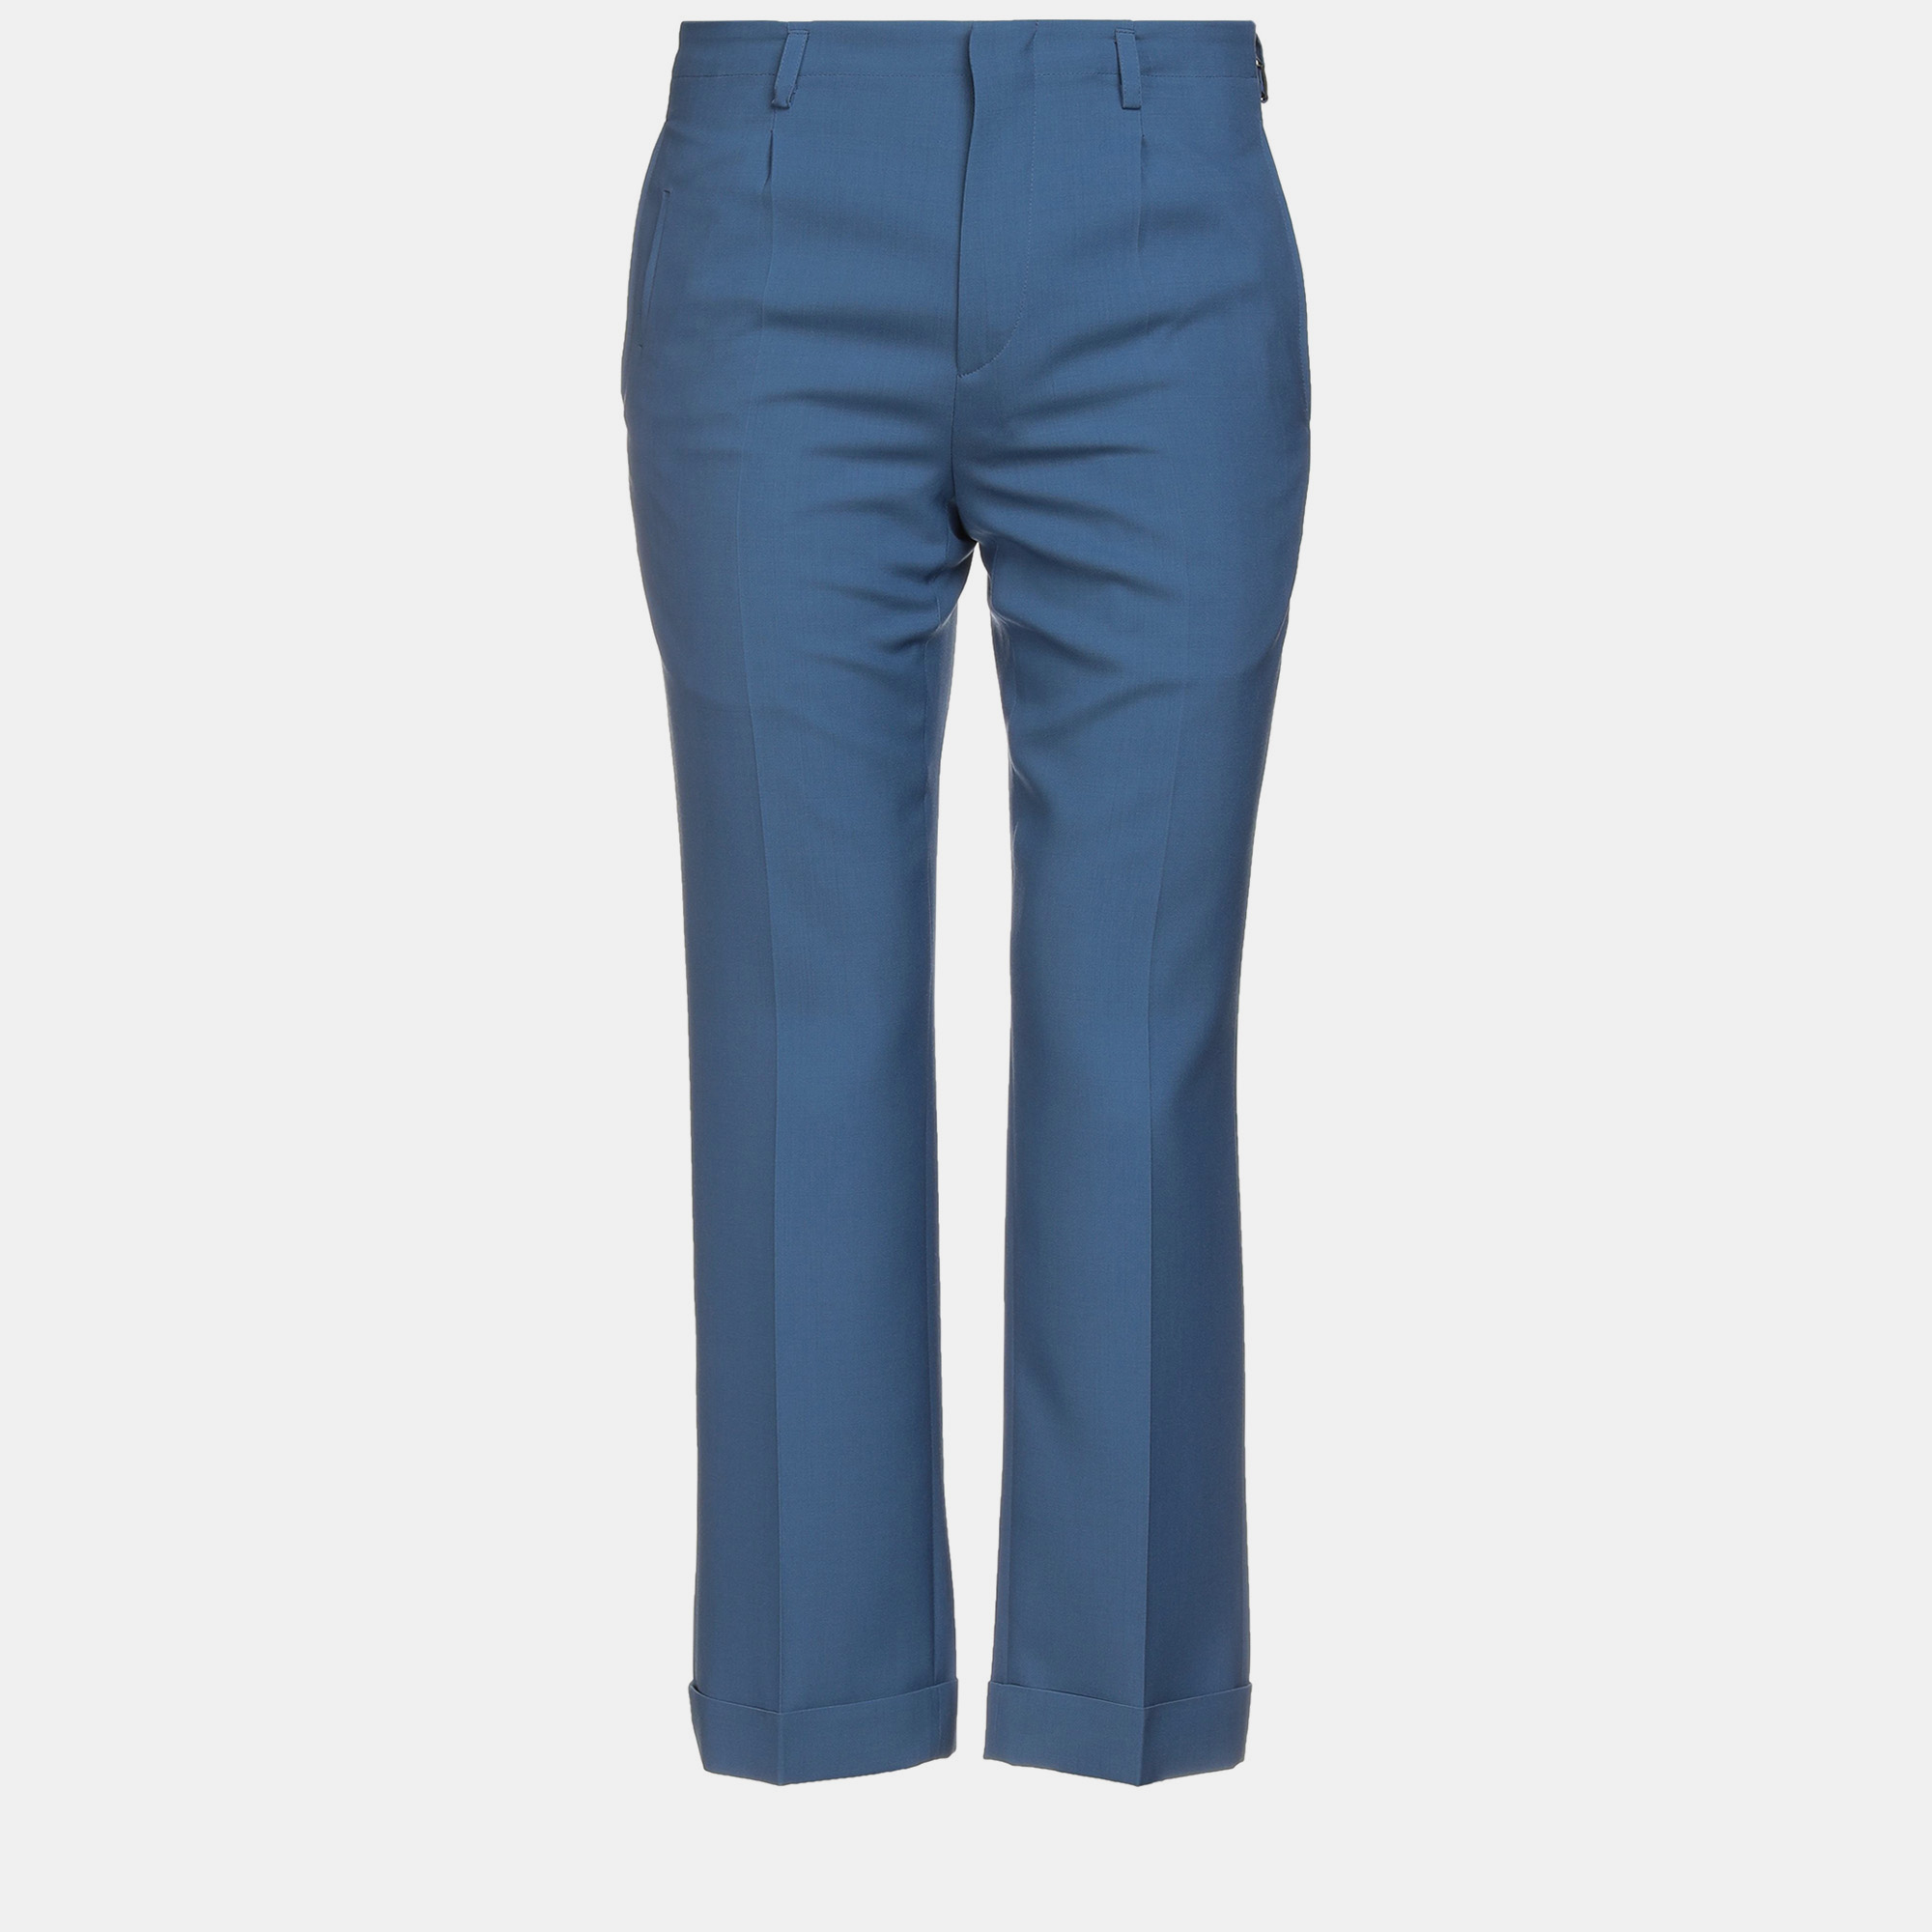 Givenchy blue wool trousers size 48